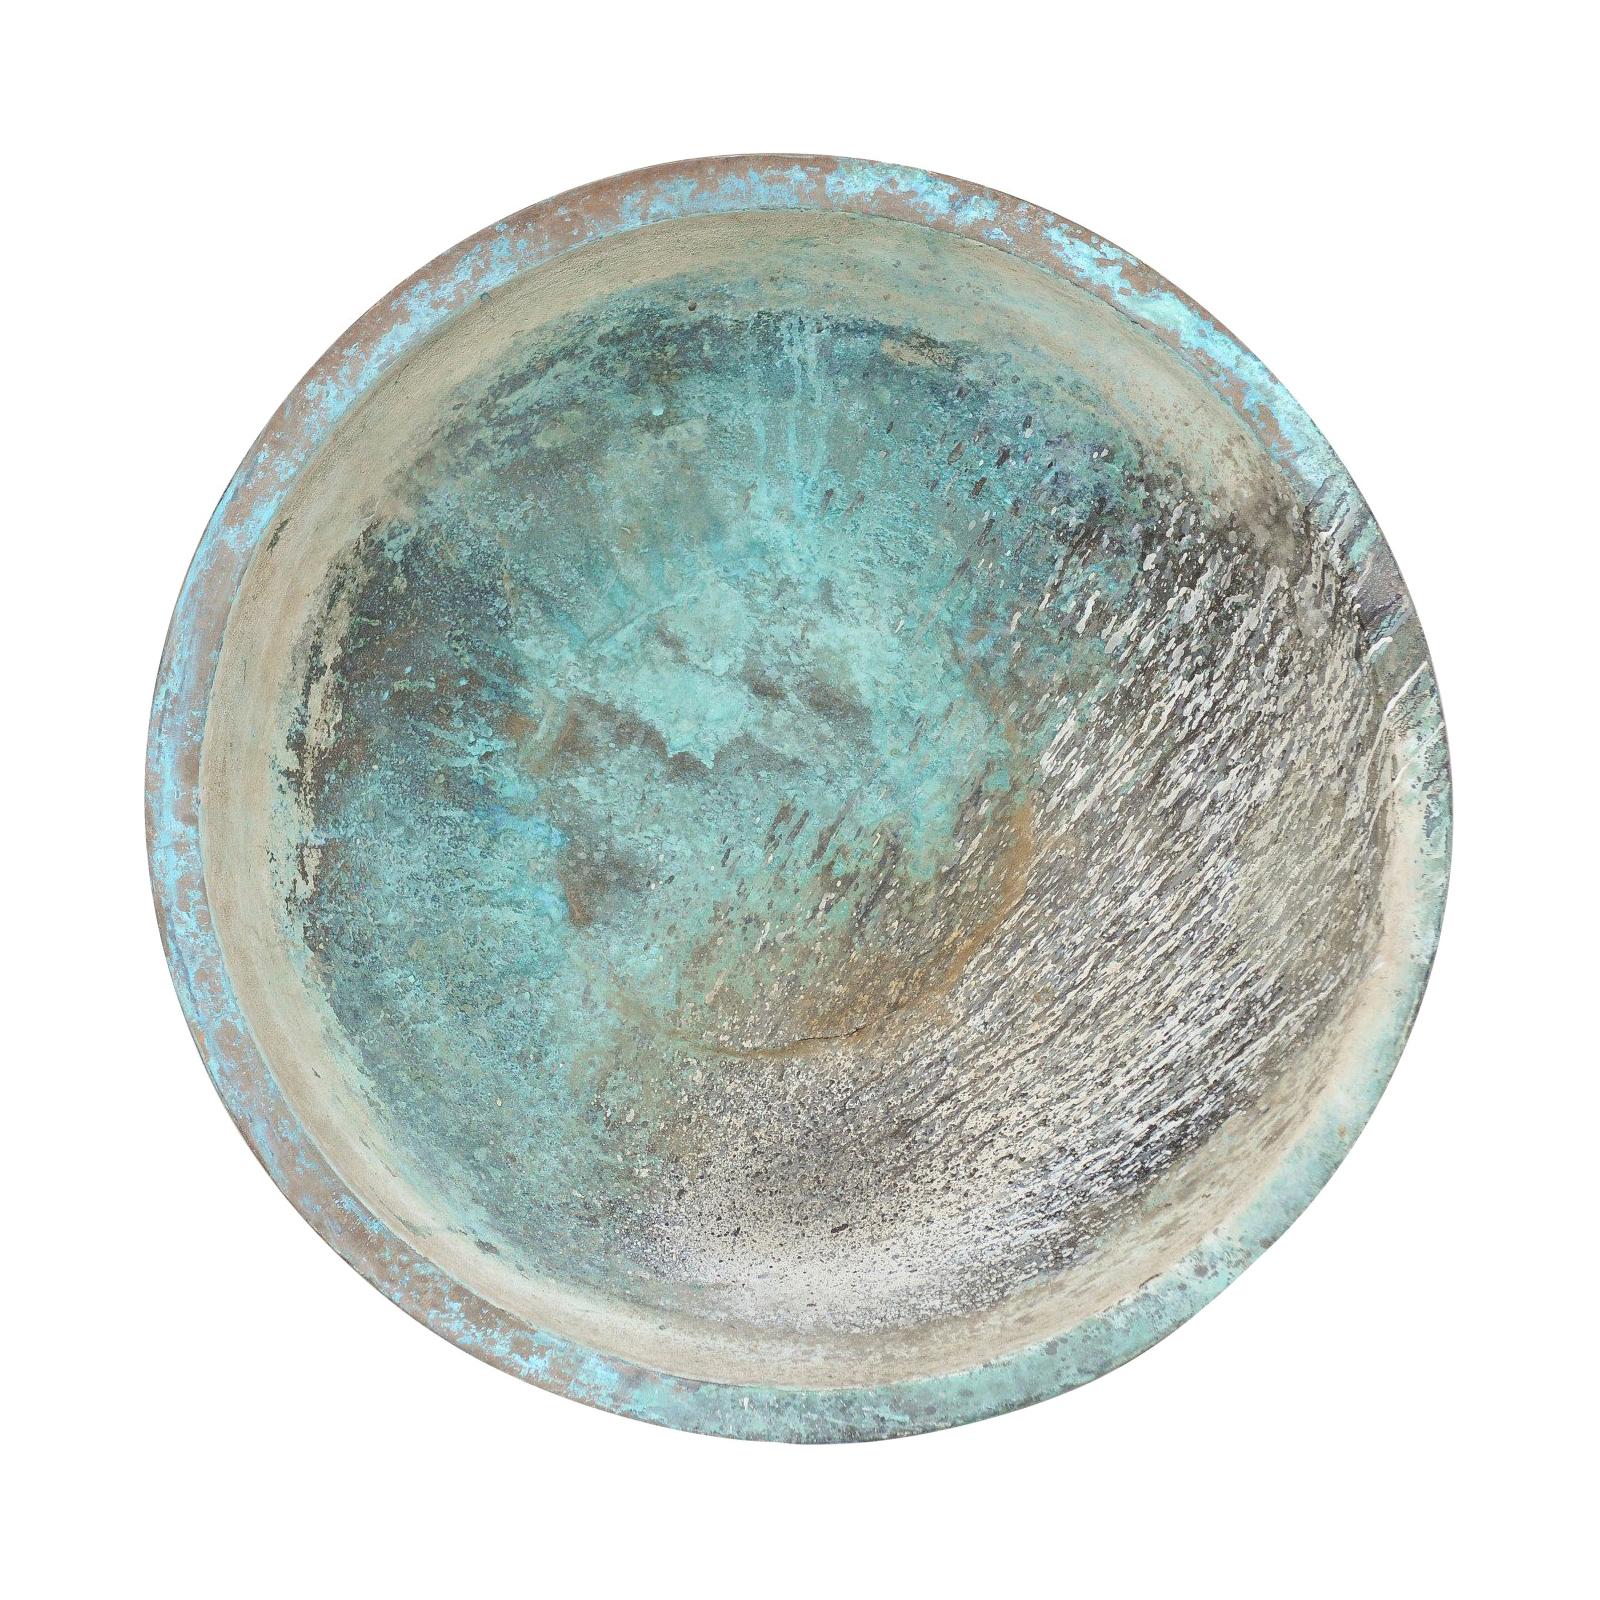 Antique Copper Bowl from Spain with Rich Blue-Green Patina